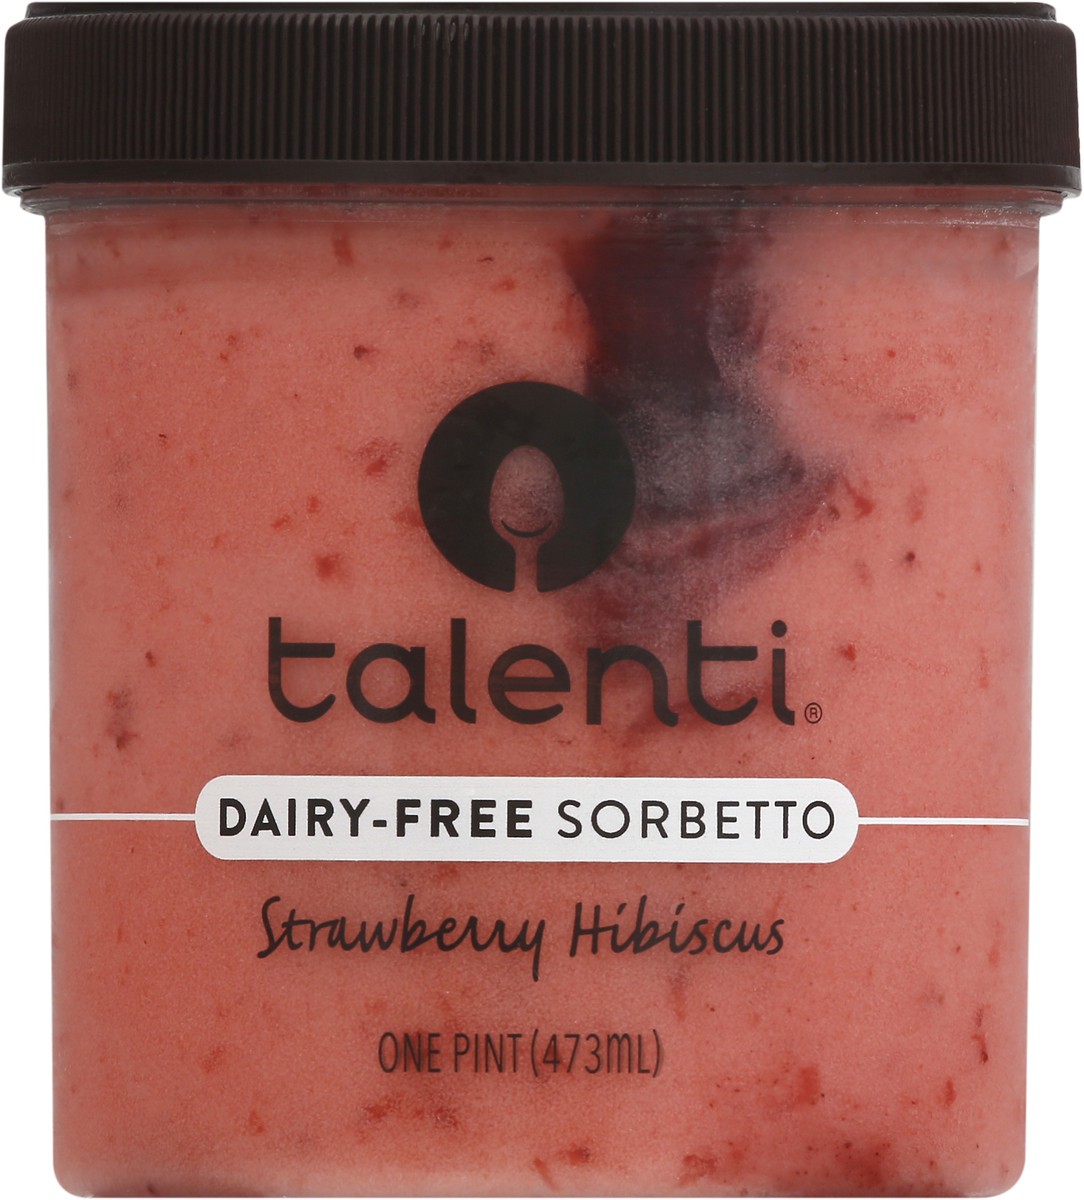 slide 5 of 12, Talenti Dairy-Free Sorbetto Strawberry Hibiscus, 1 pint, 1 pint